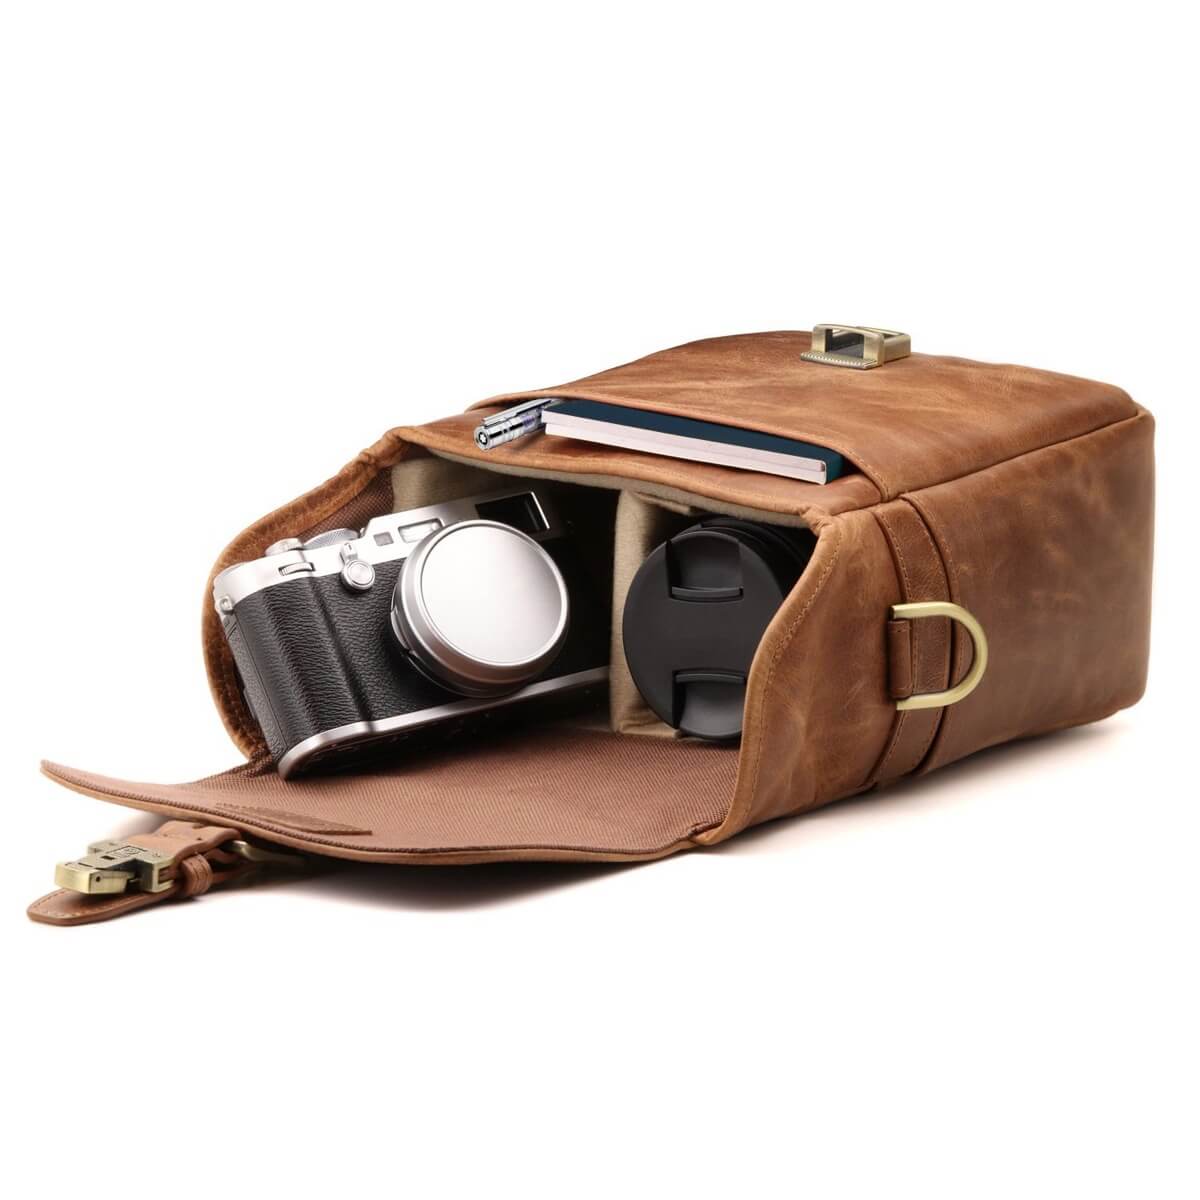 45 Great Camera Bags for Every Budget - The Photo Argus